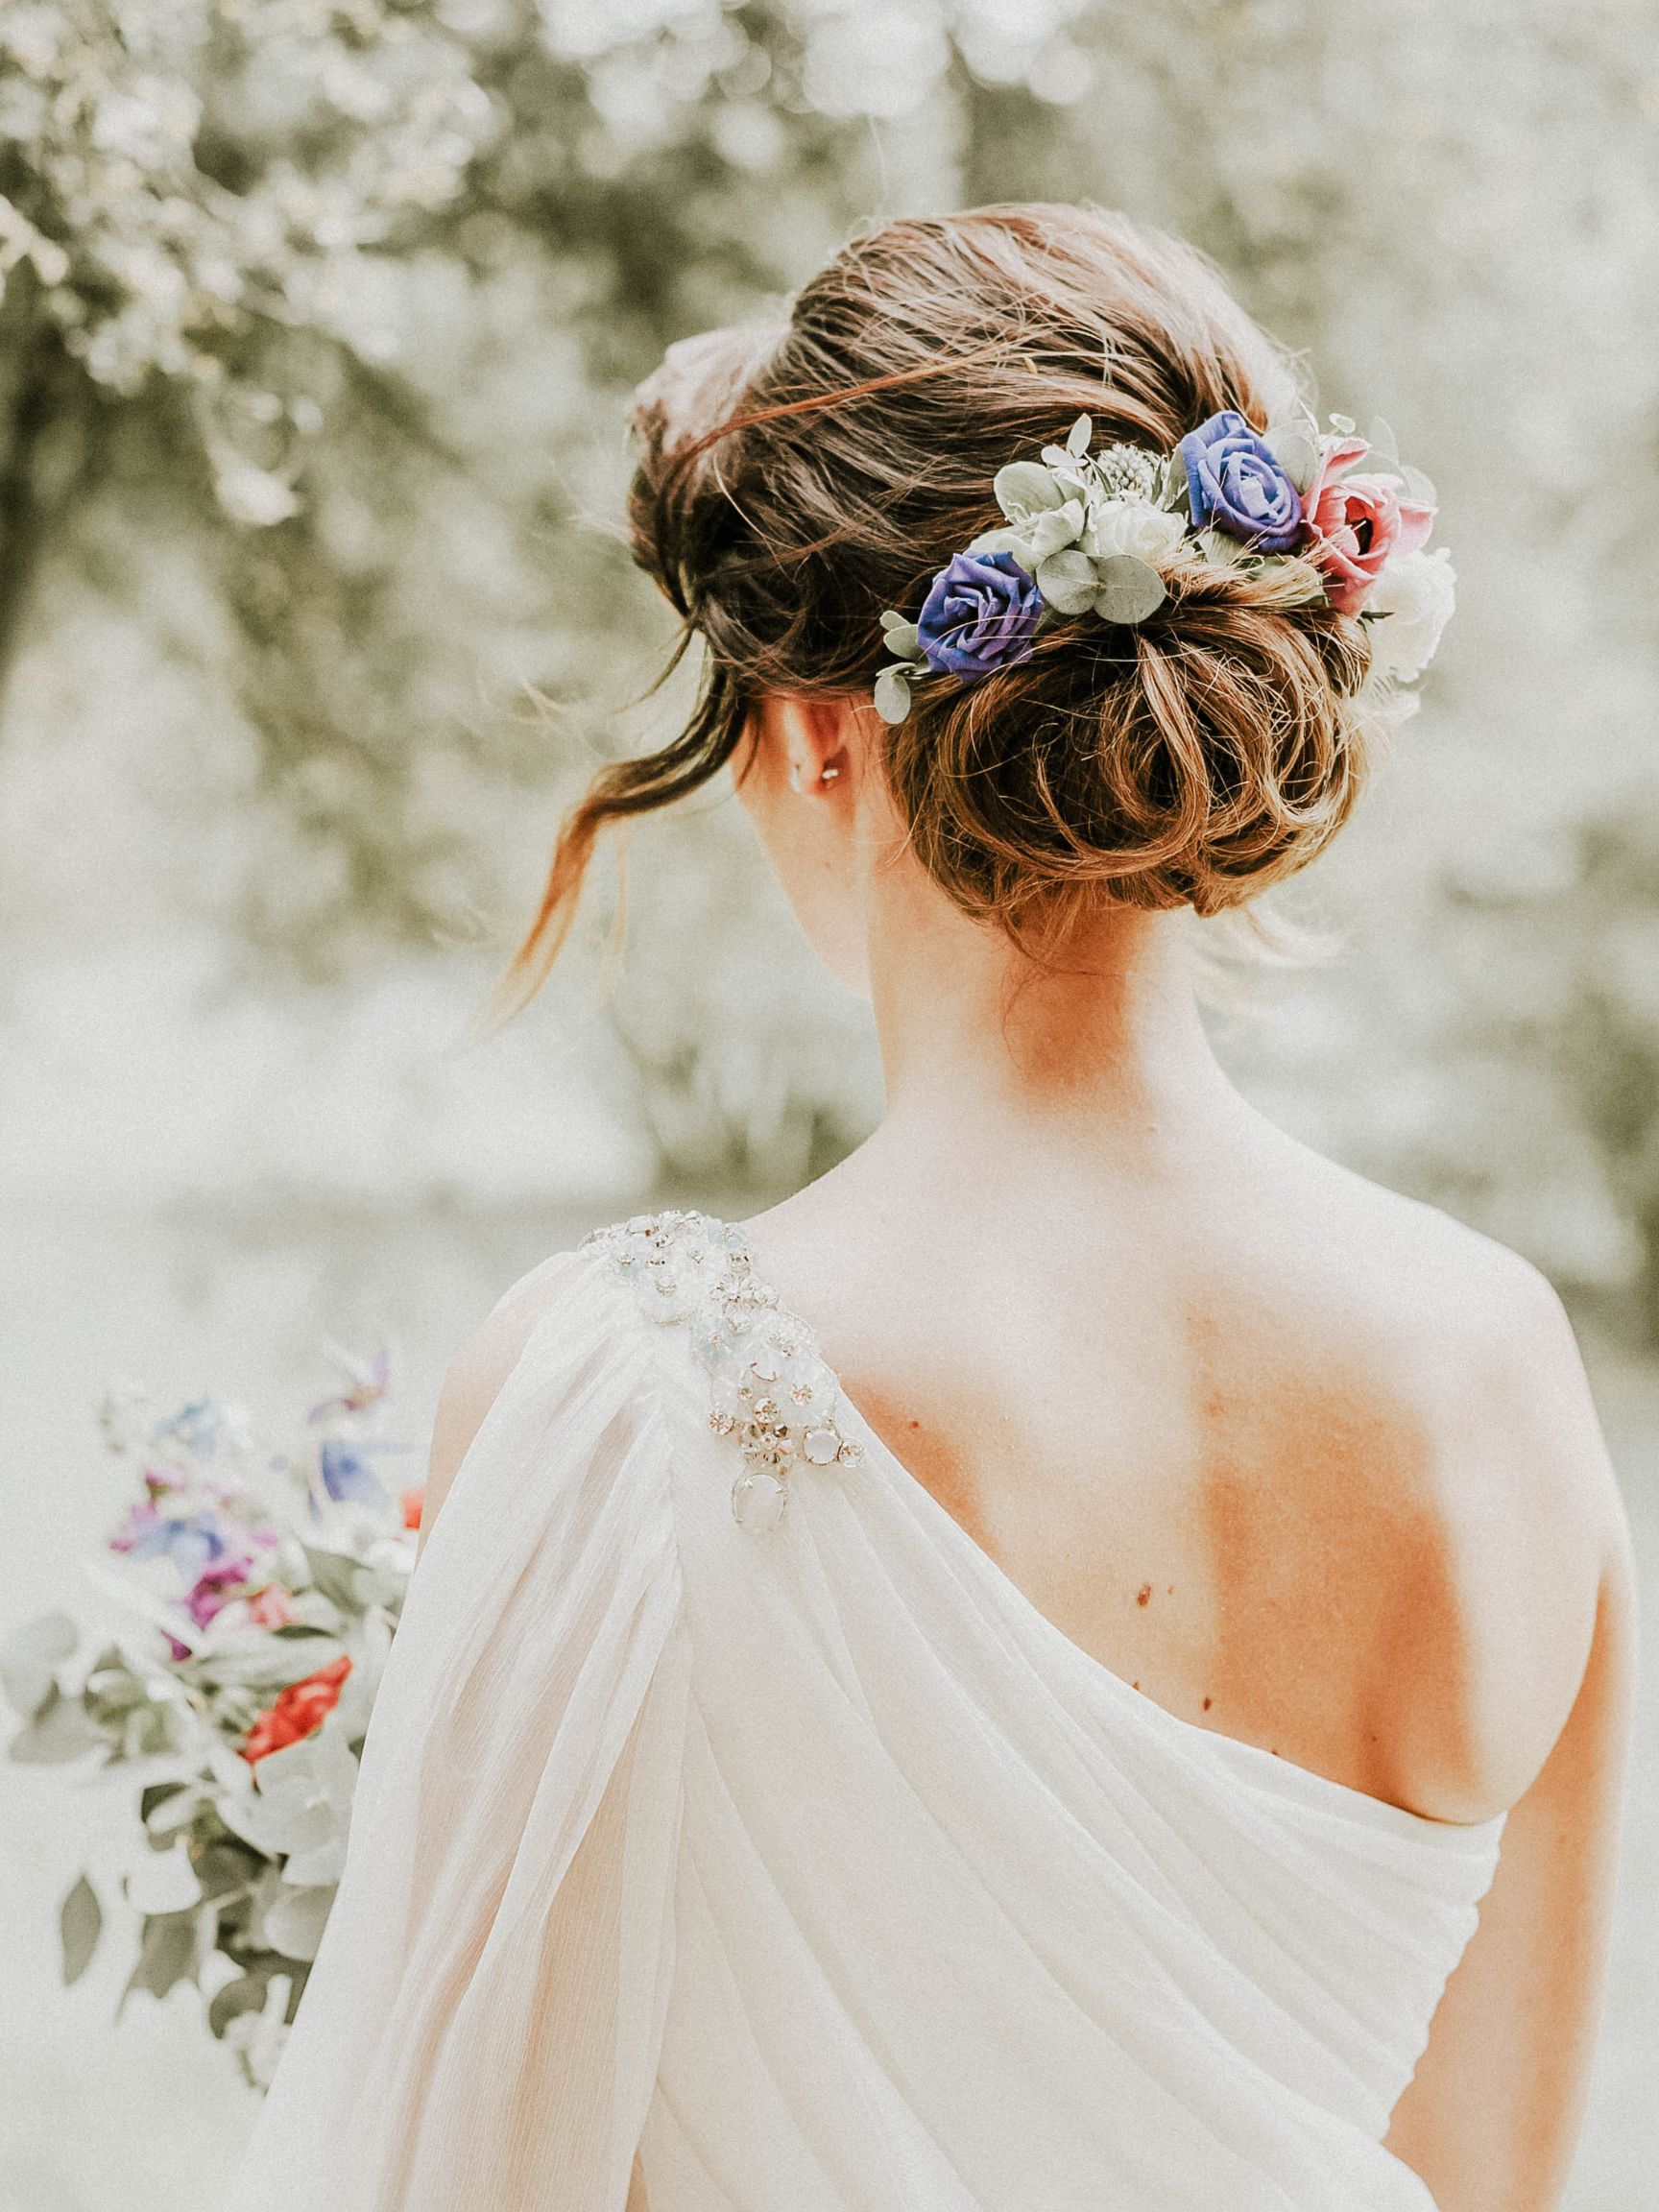 5 Wedding Buns to Complete Your Wedding Style - Wed Mayhem